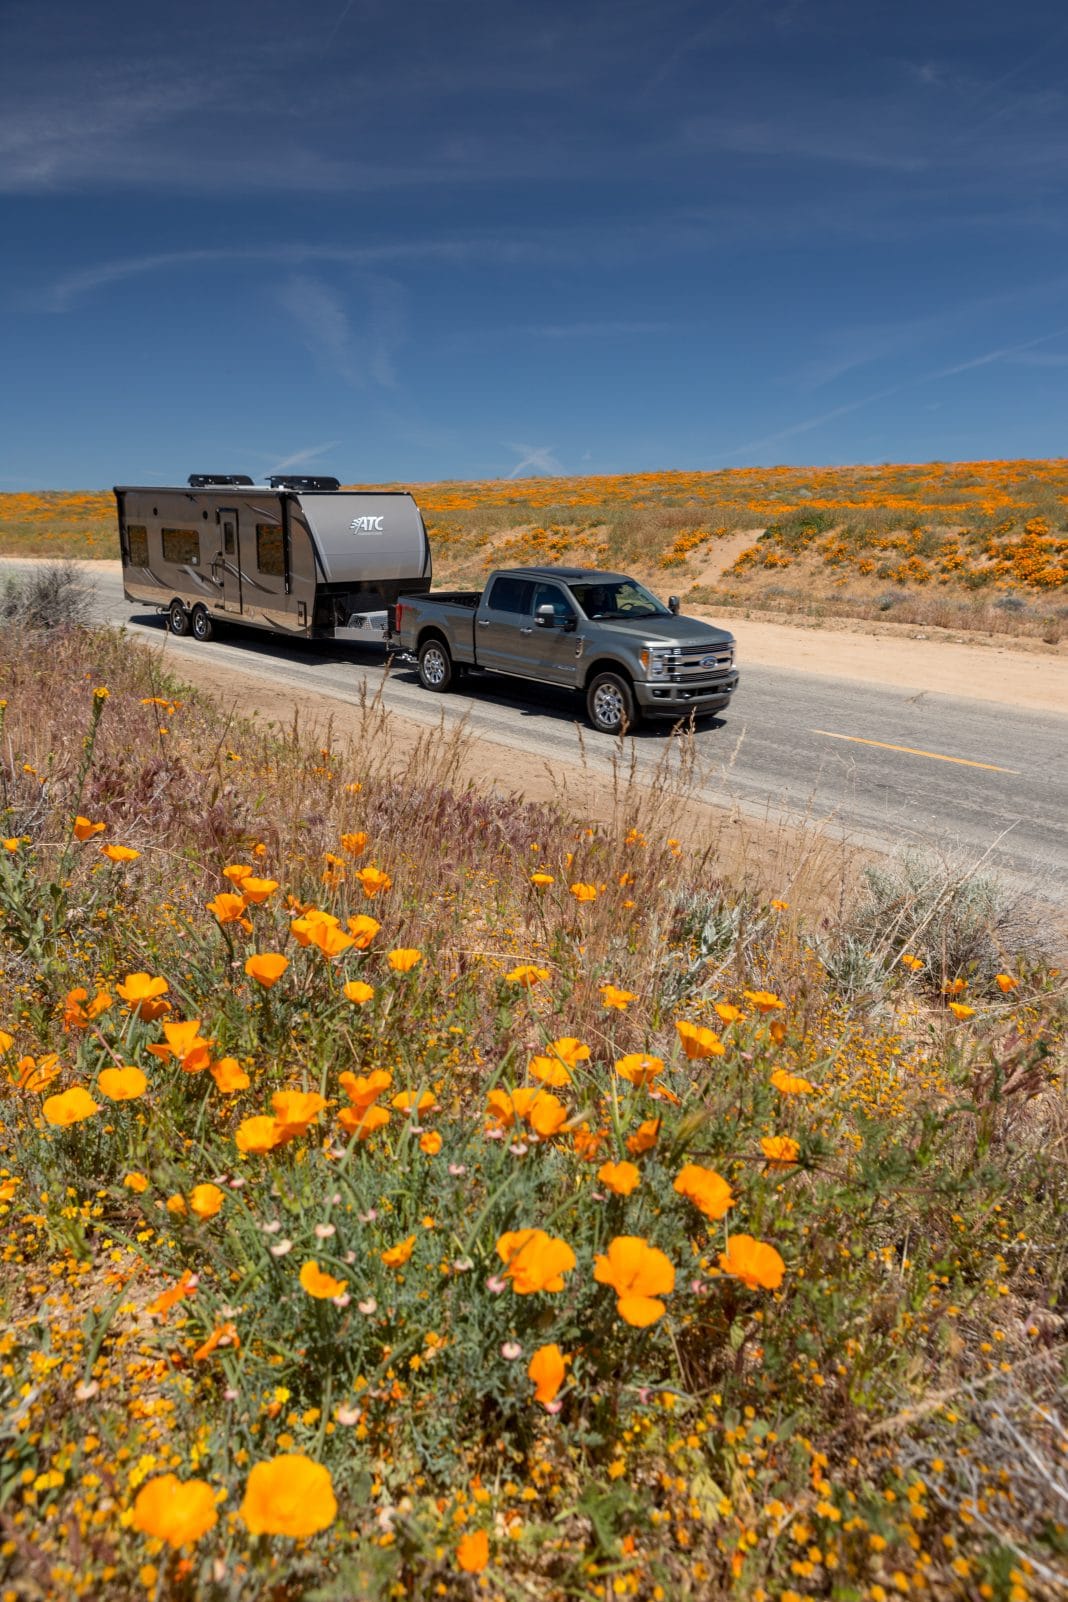 Silver Ford F-250 towing silver ATC 8528 on highway surrounded by orange poppies.